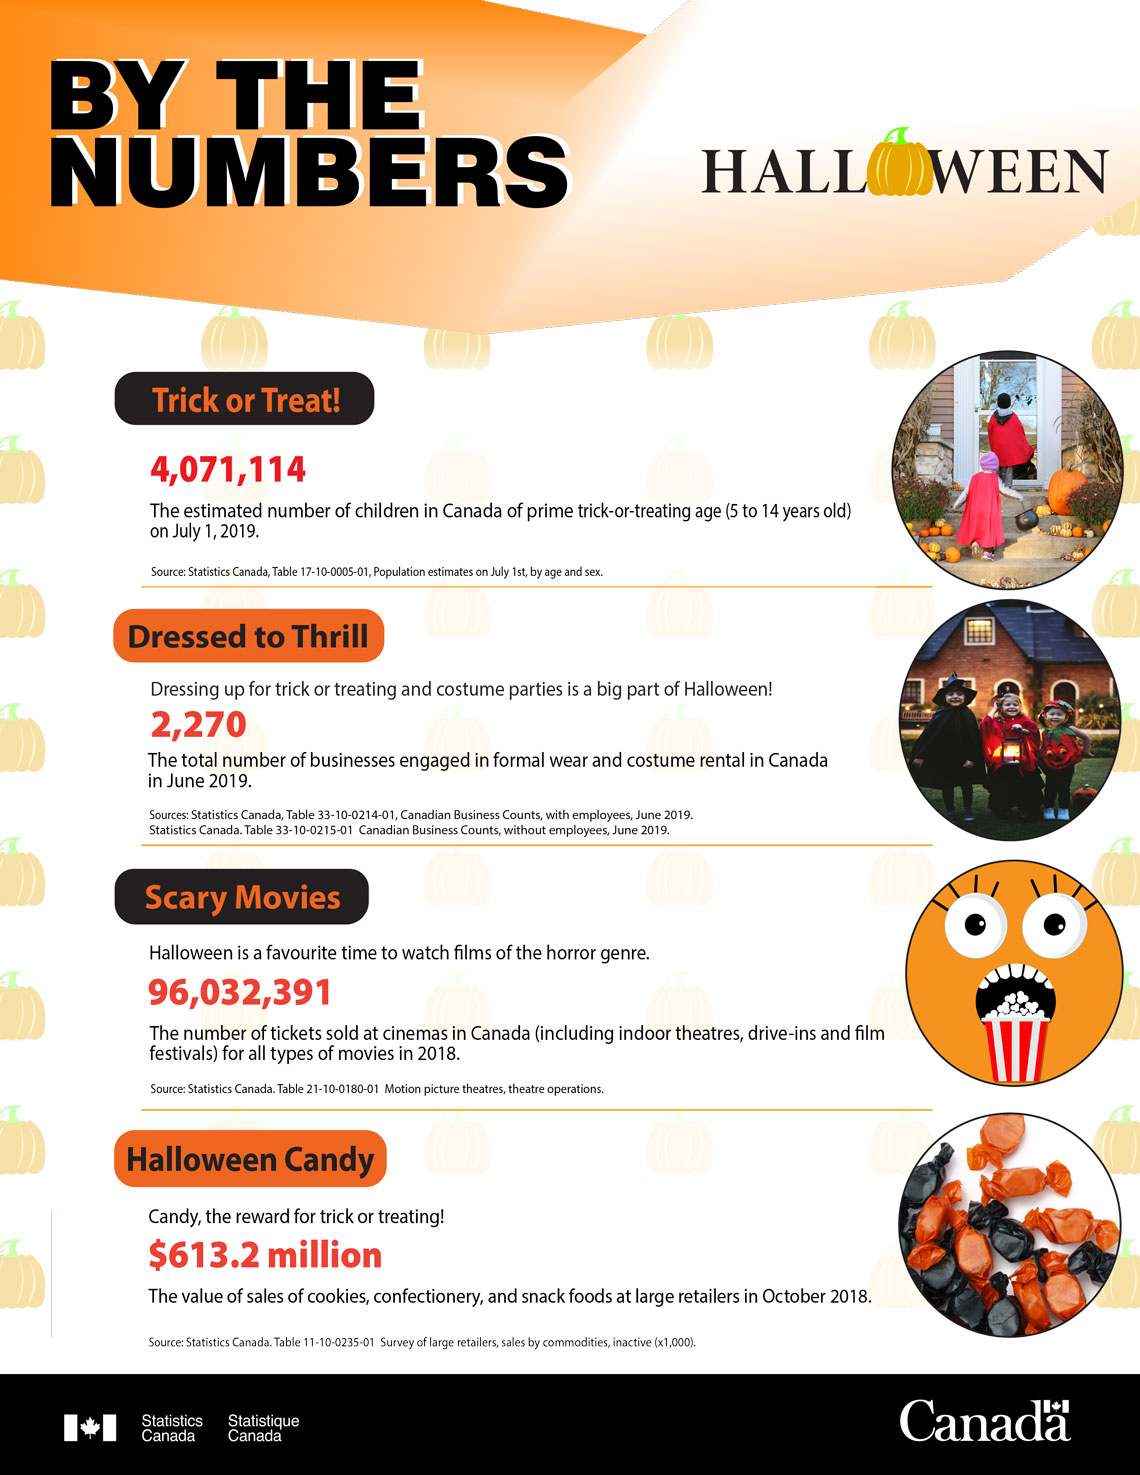 By the numbers - Halloween 2019 